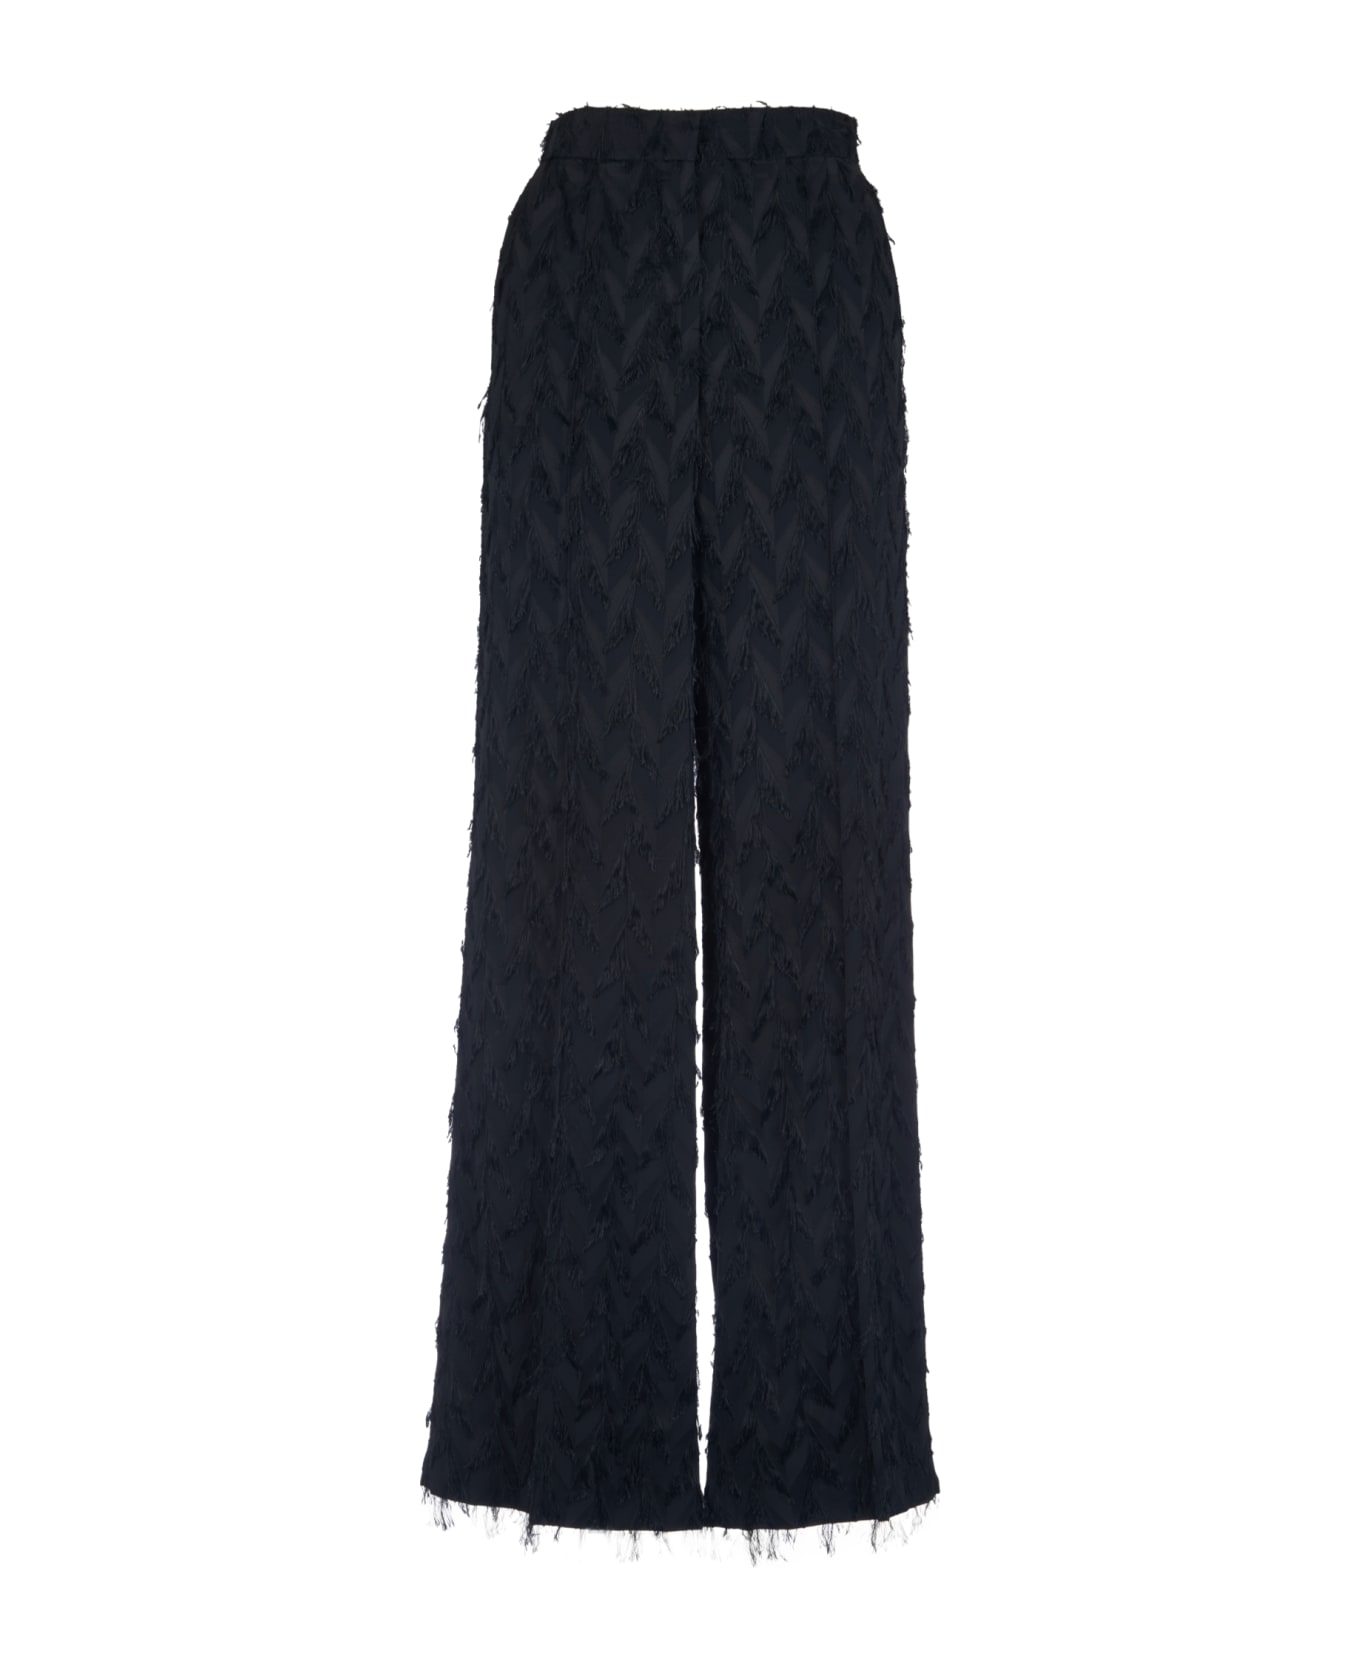 MSGM Concealed Fringed Trousers - Nero ボトムス